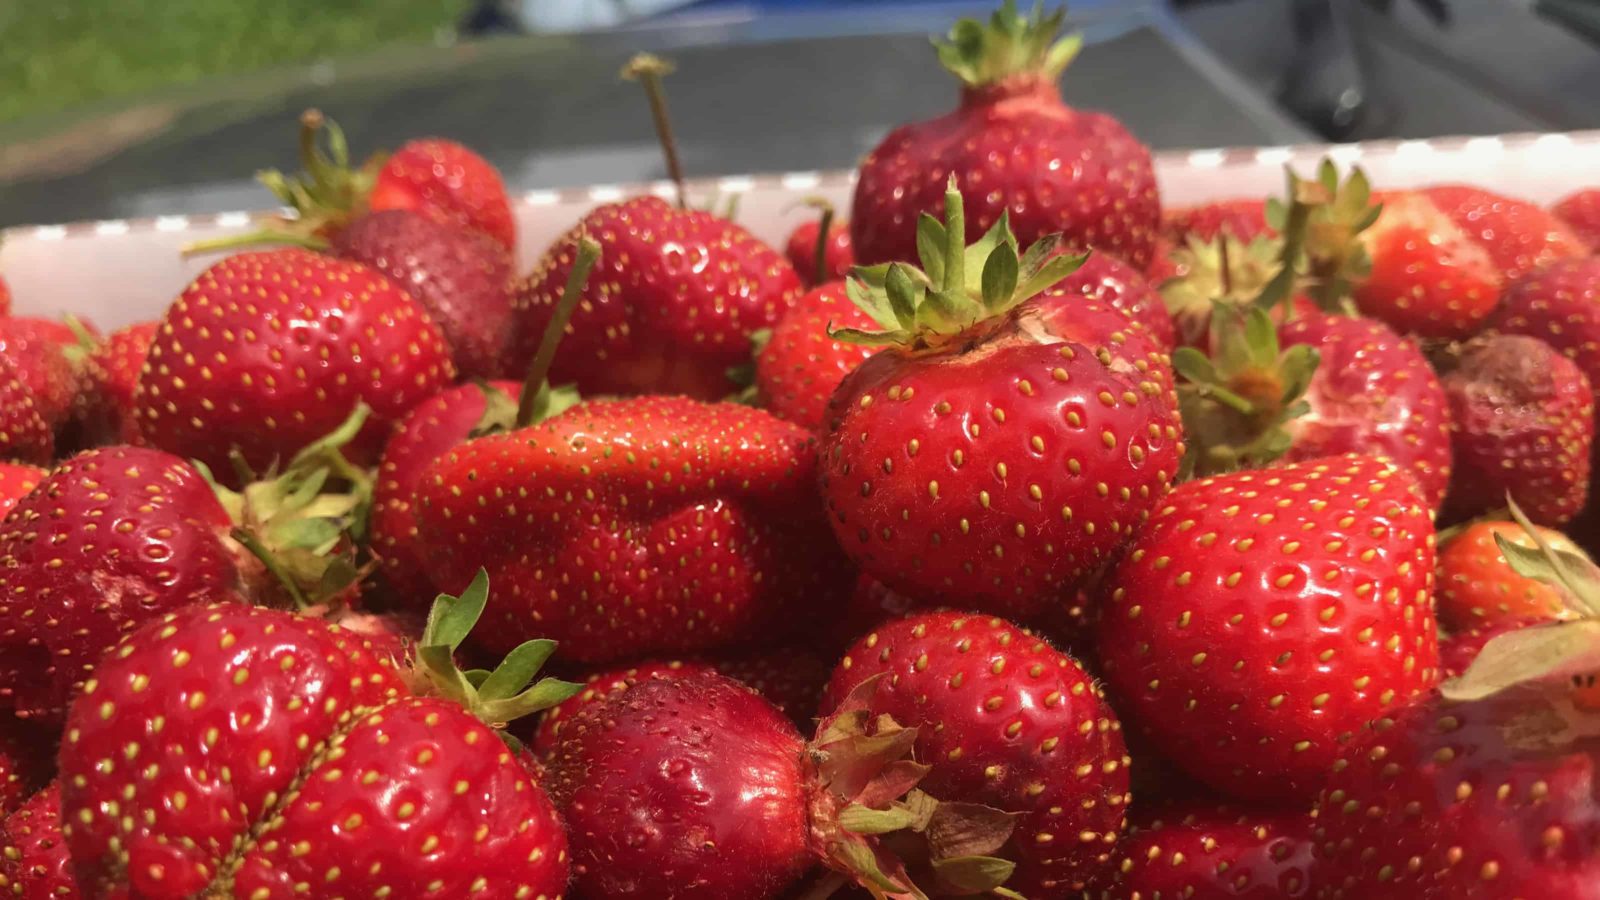 Strawberries catch the sunlight at Mountain View Farm in Lanesborough.